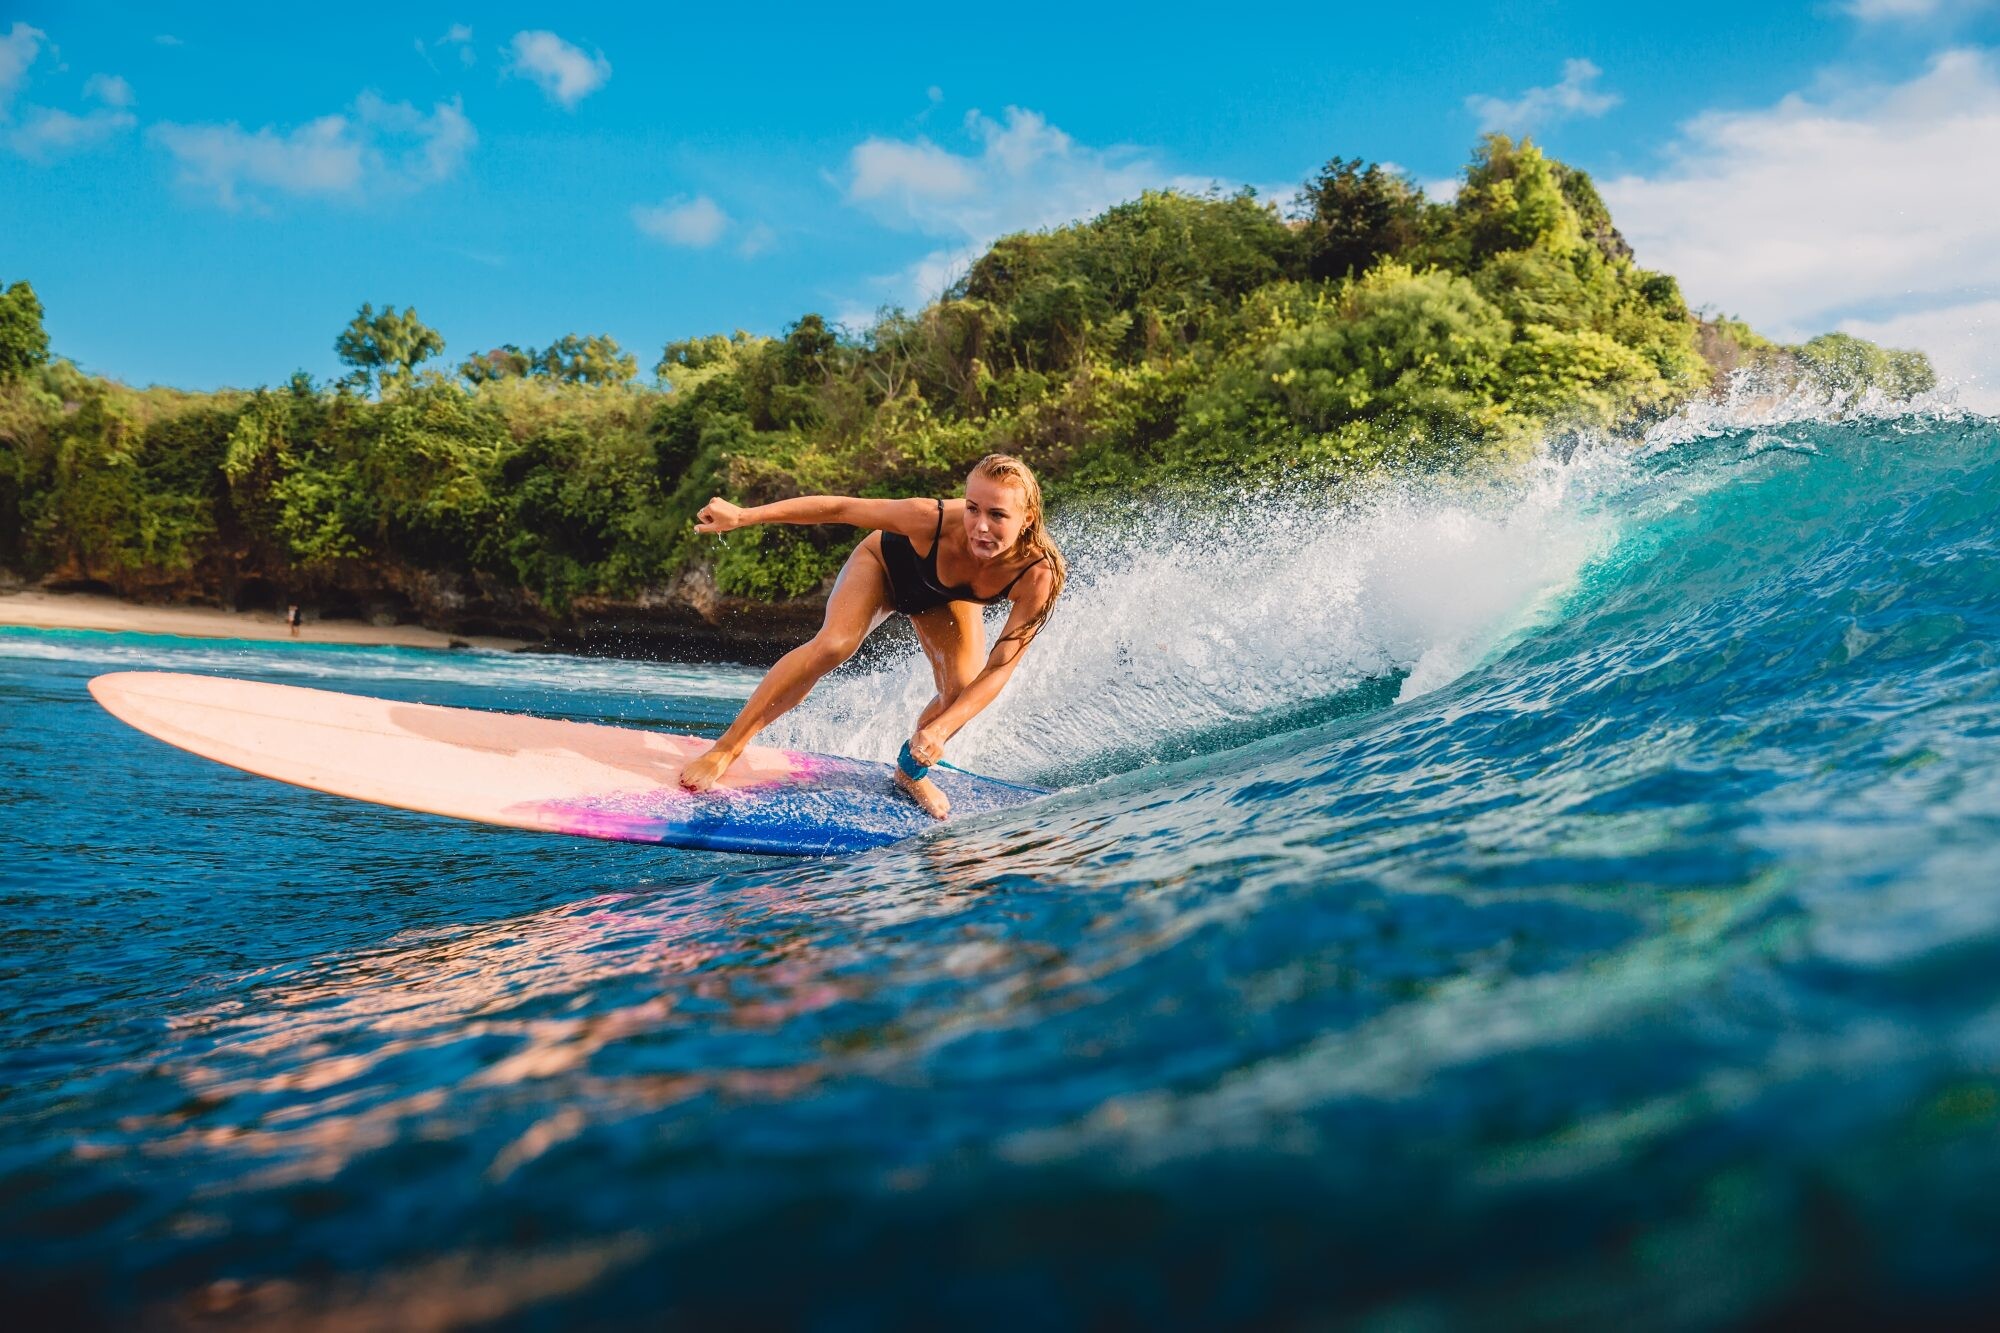 Girl Surfing: Women surf swimsuits, Riding a moving wave of water, Recreational water sports. 2000x1340 HD Wallpaper.